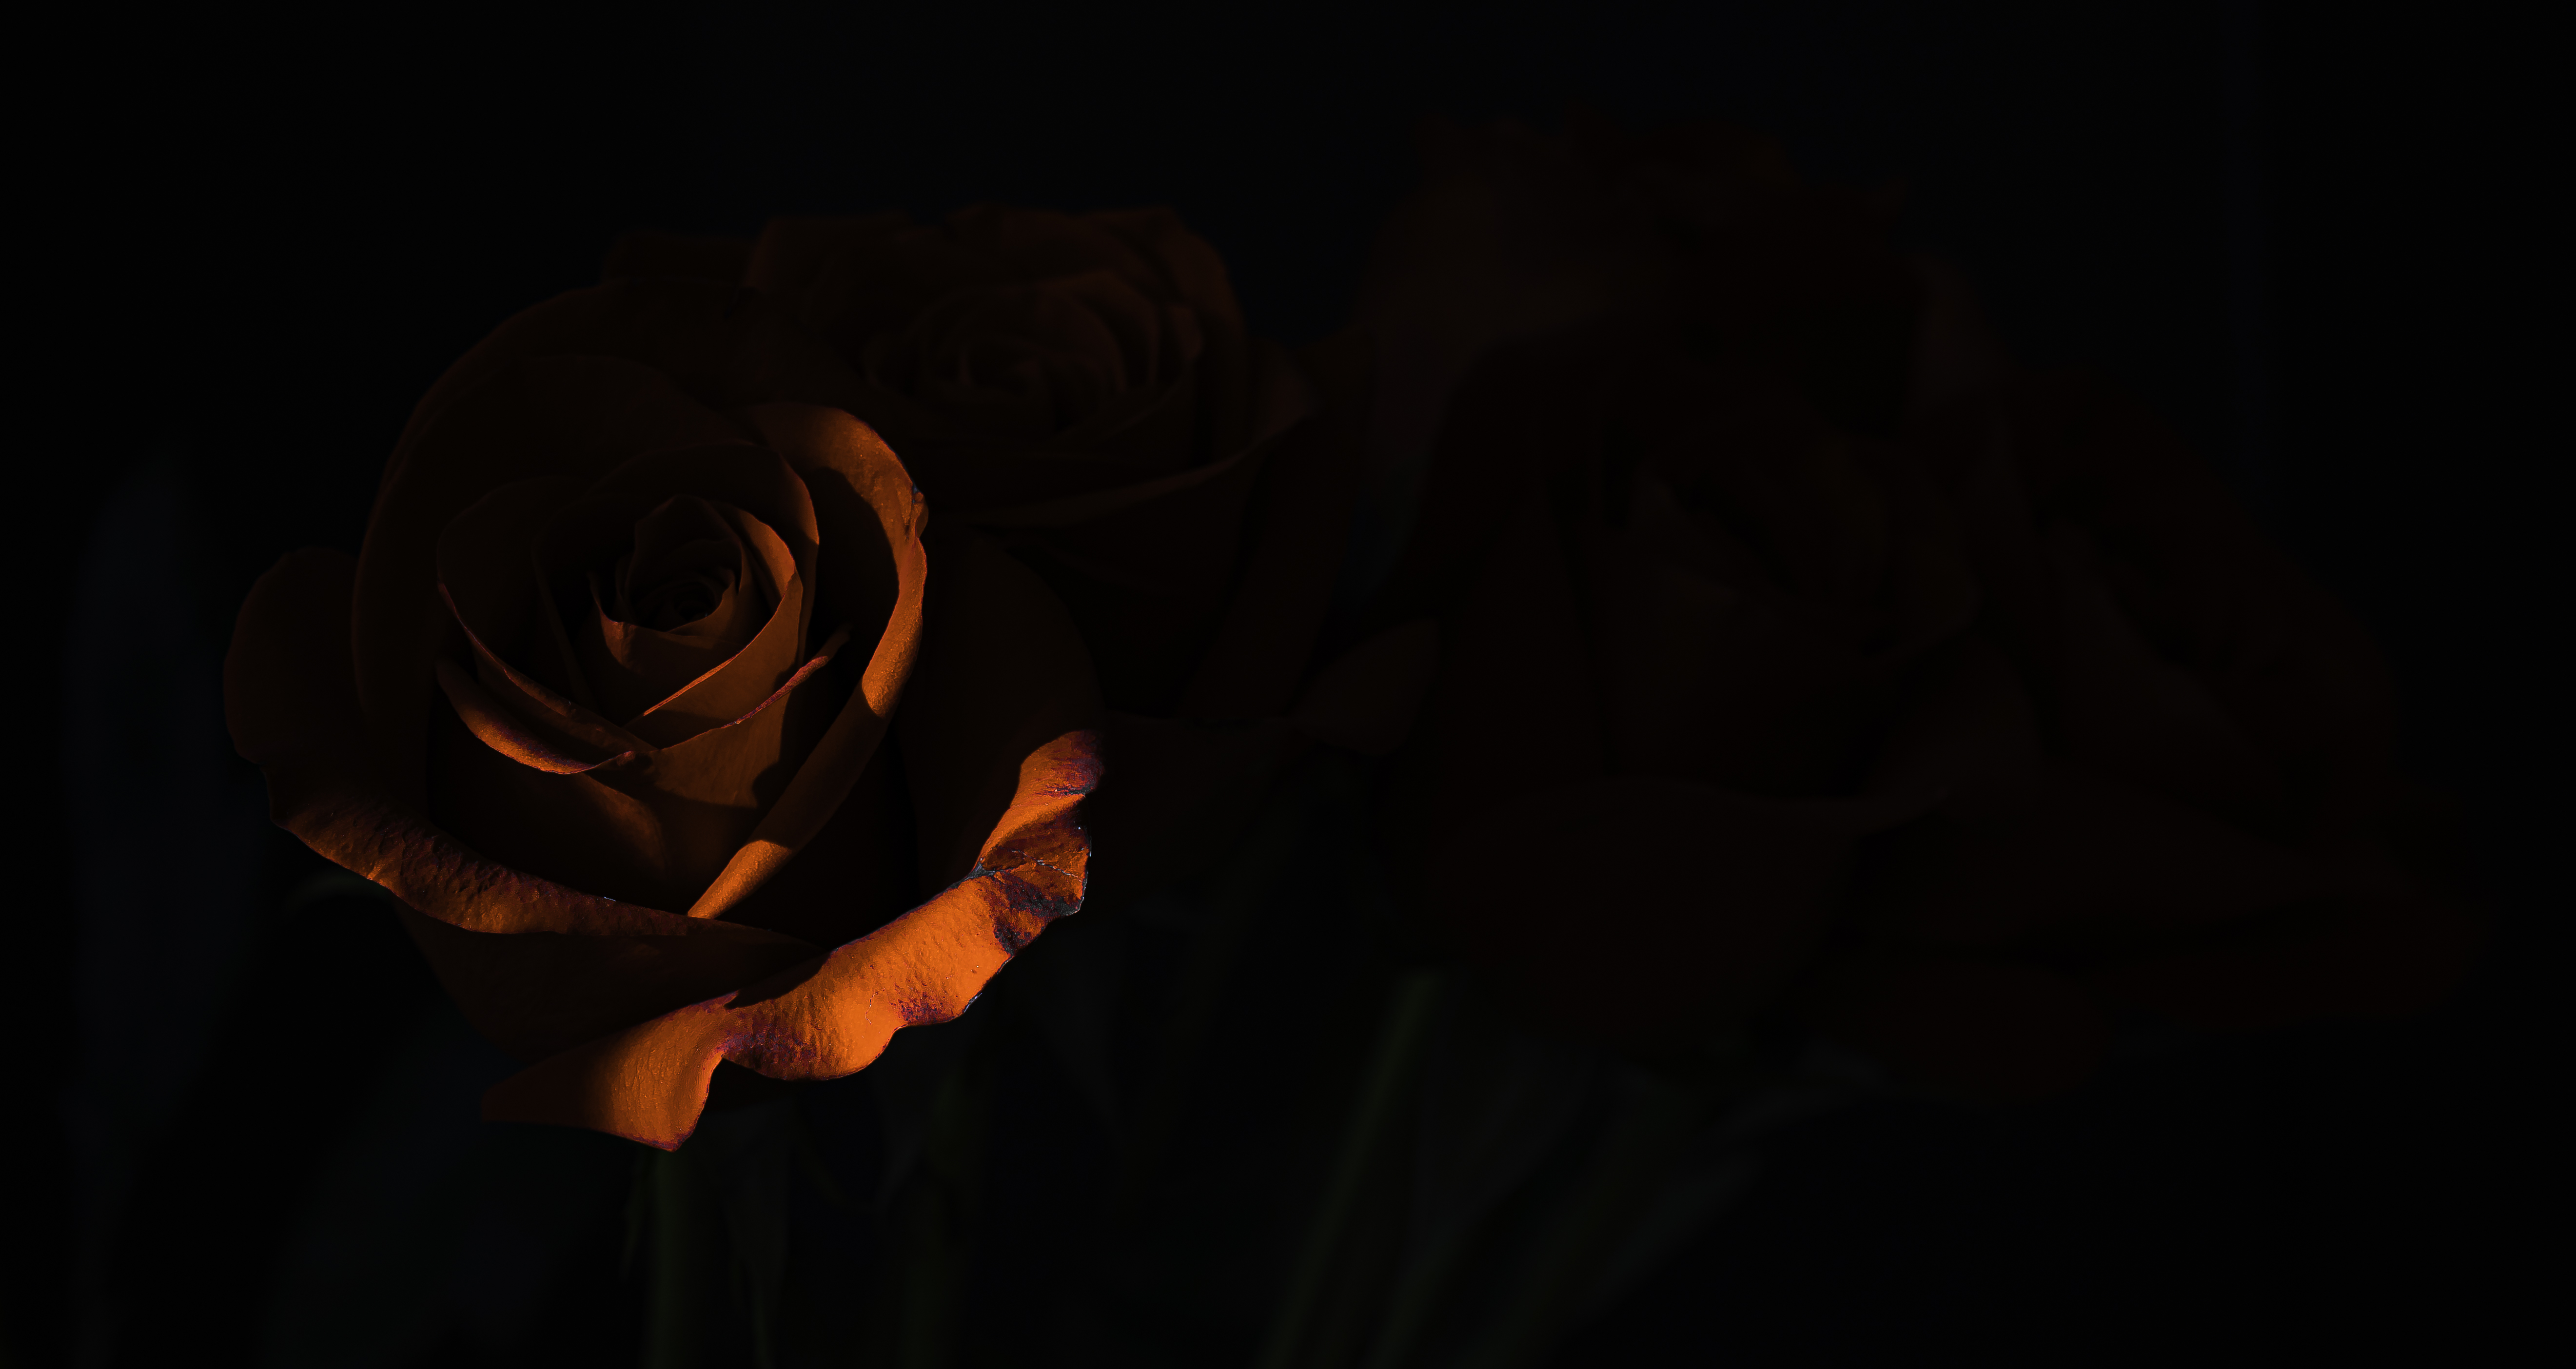 X morning rose dark k x resolution hd k wallpapers images backgrounds photos and pictures